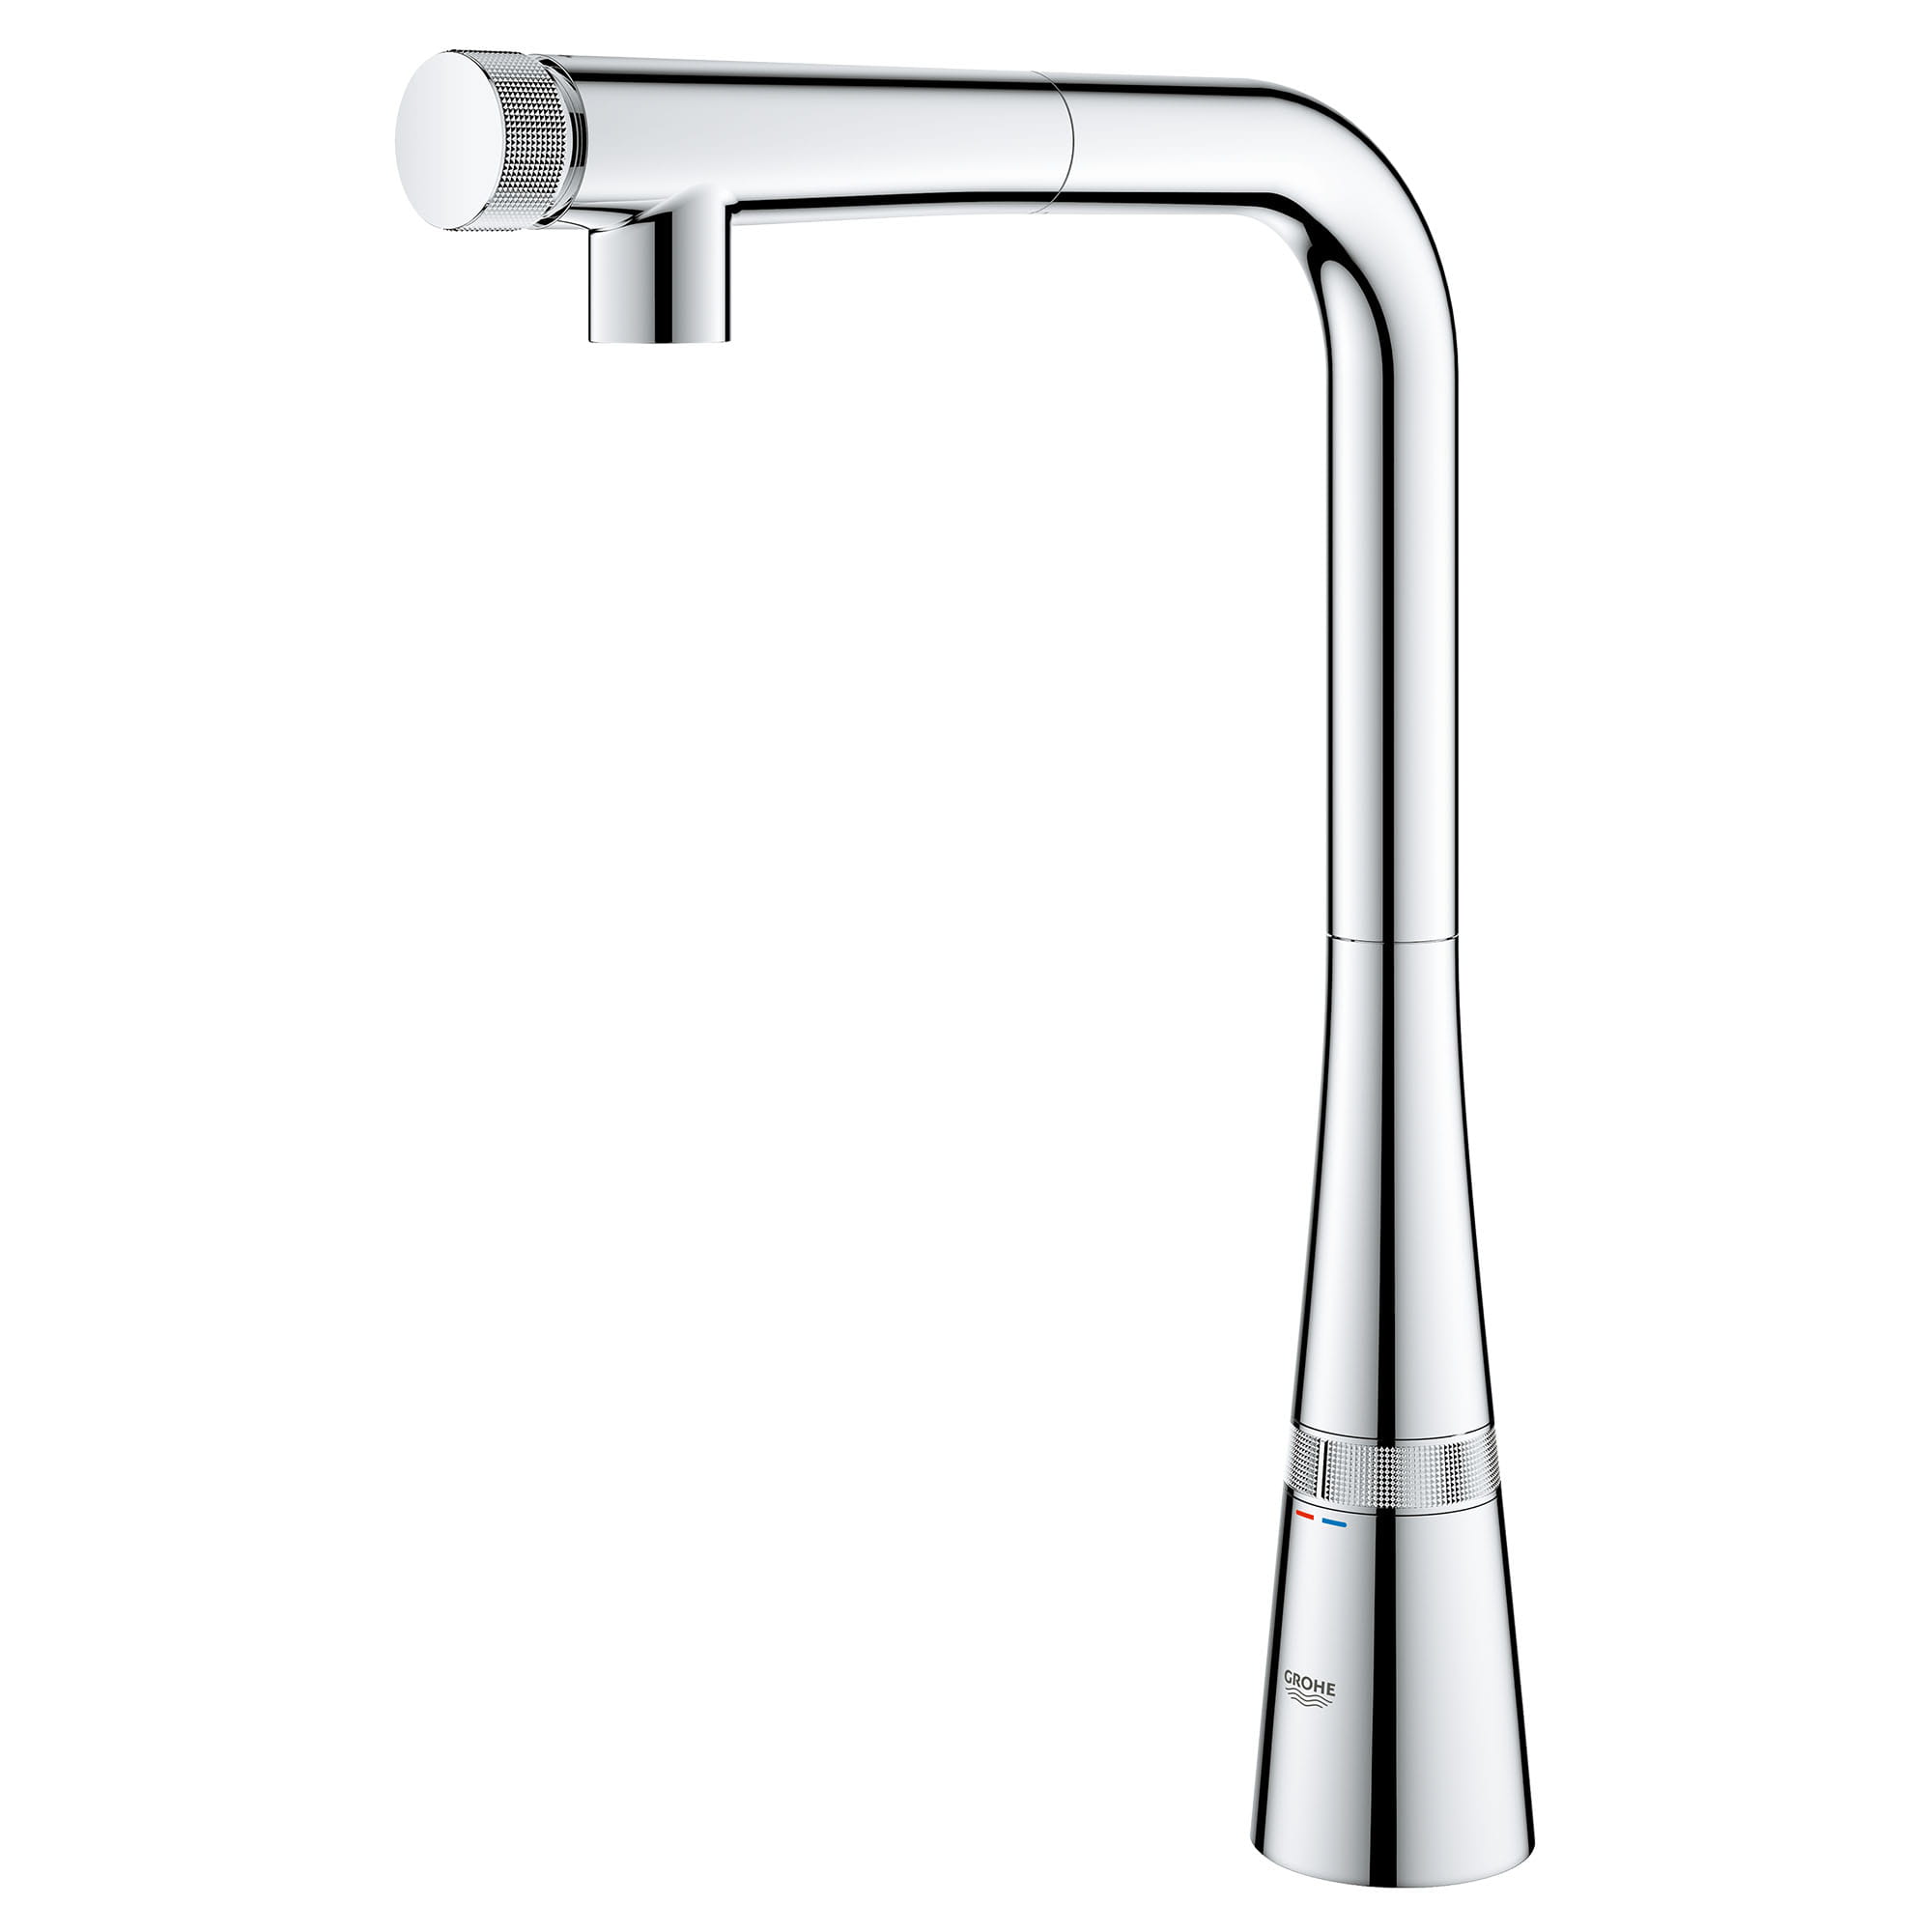 SmartControl Pull-Out Single Spray Kitchen Faucet 6.6 L/min (1.75 gpm)